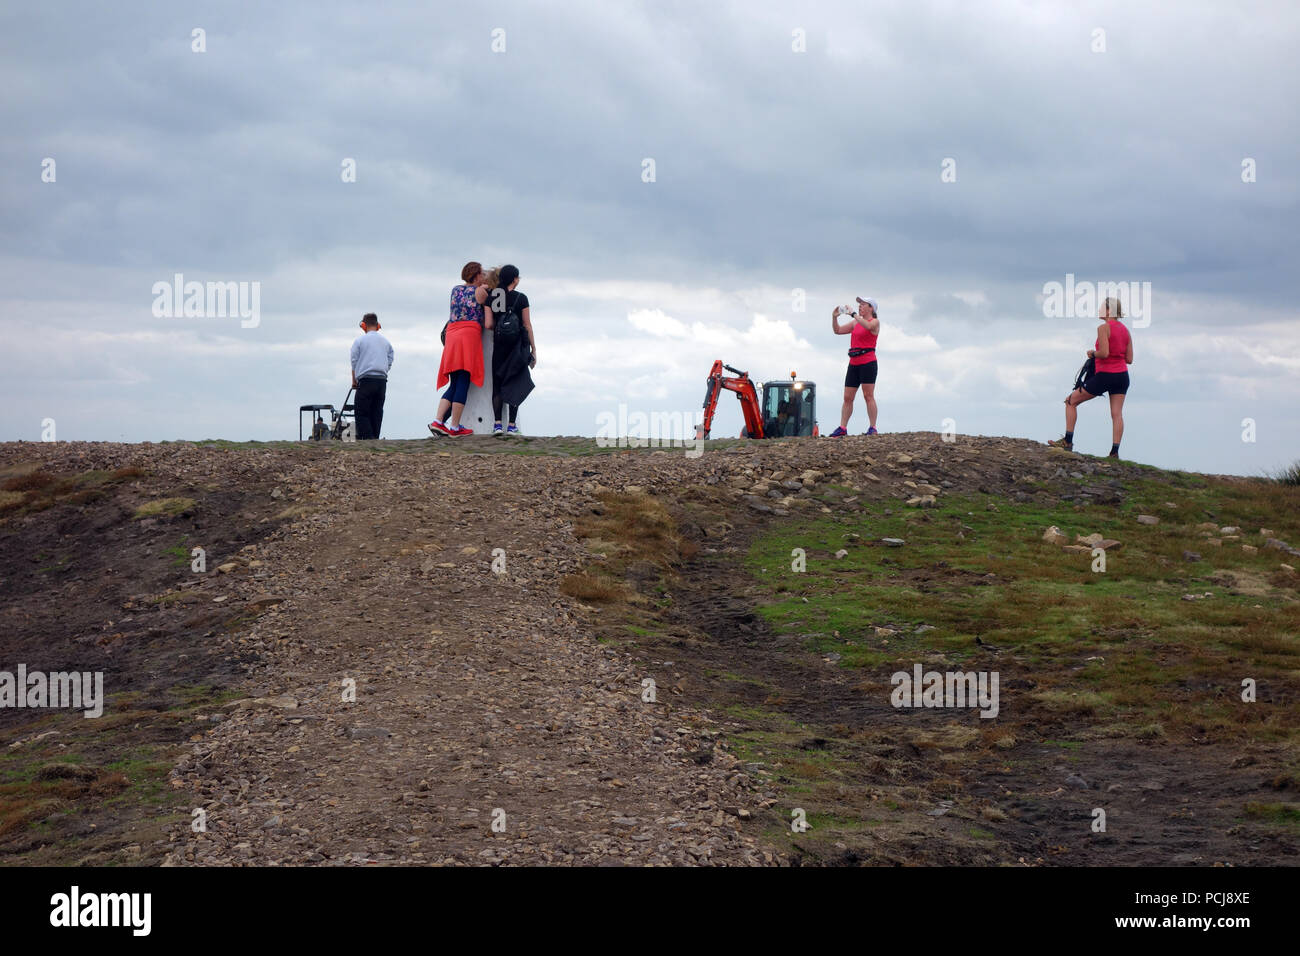 People Taking Photos near Digger Working on the New Path Being Constructed Leading up to the Trig Column on the Summit of Pendle Hill, Lancashire, Stock Photo